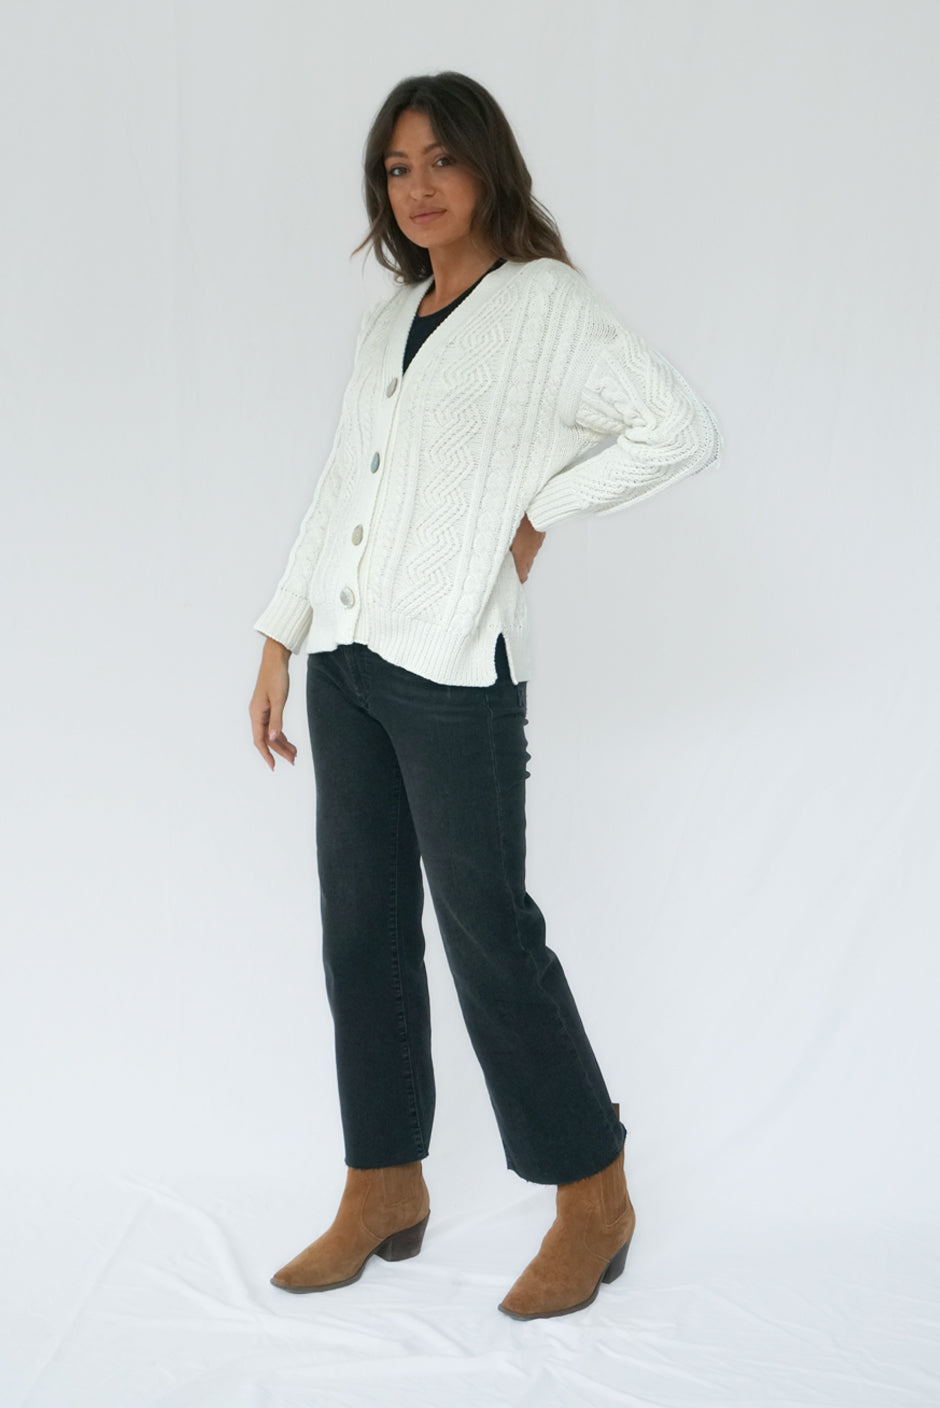 Sustainable & Ethical Handknit Cable-Knit Cotton Cardigan: the